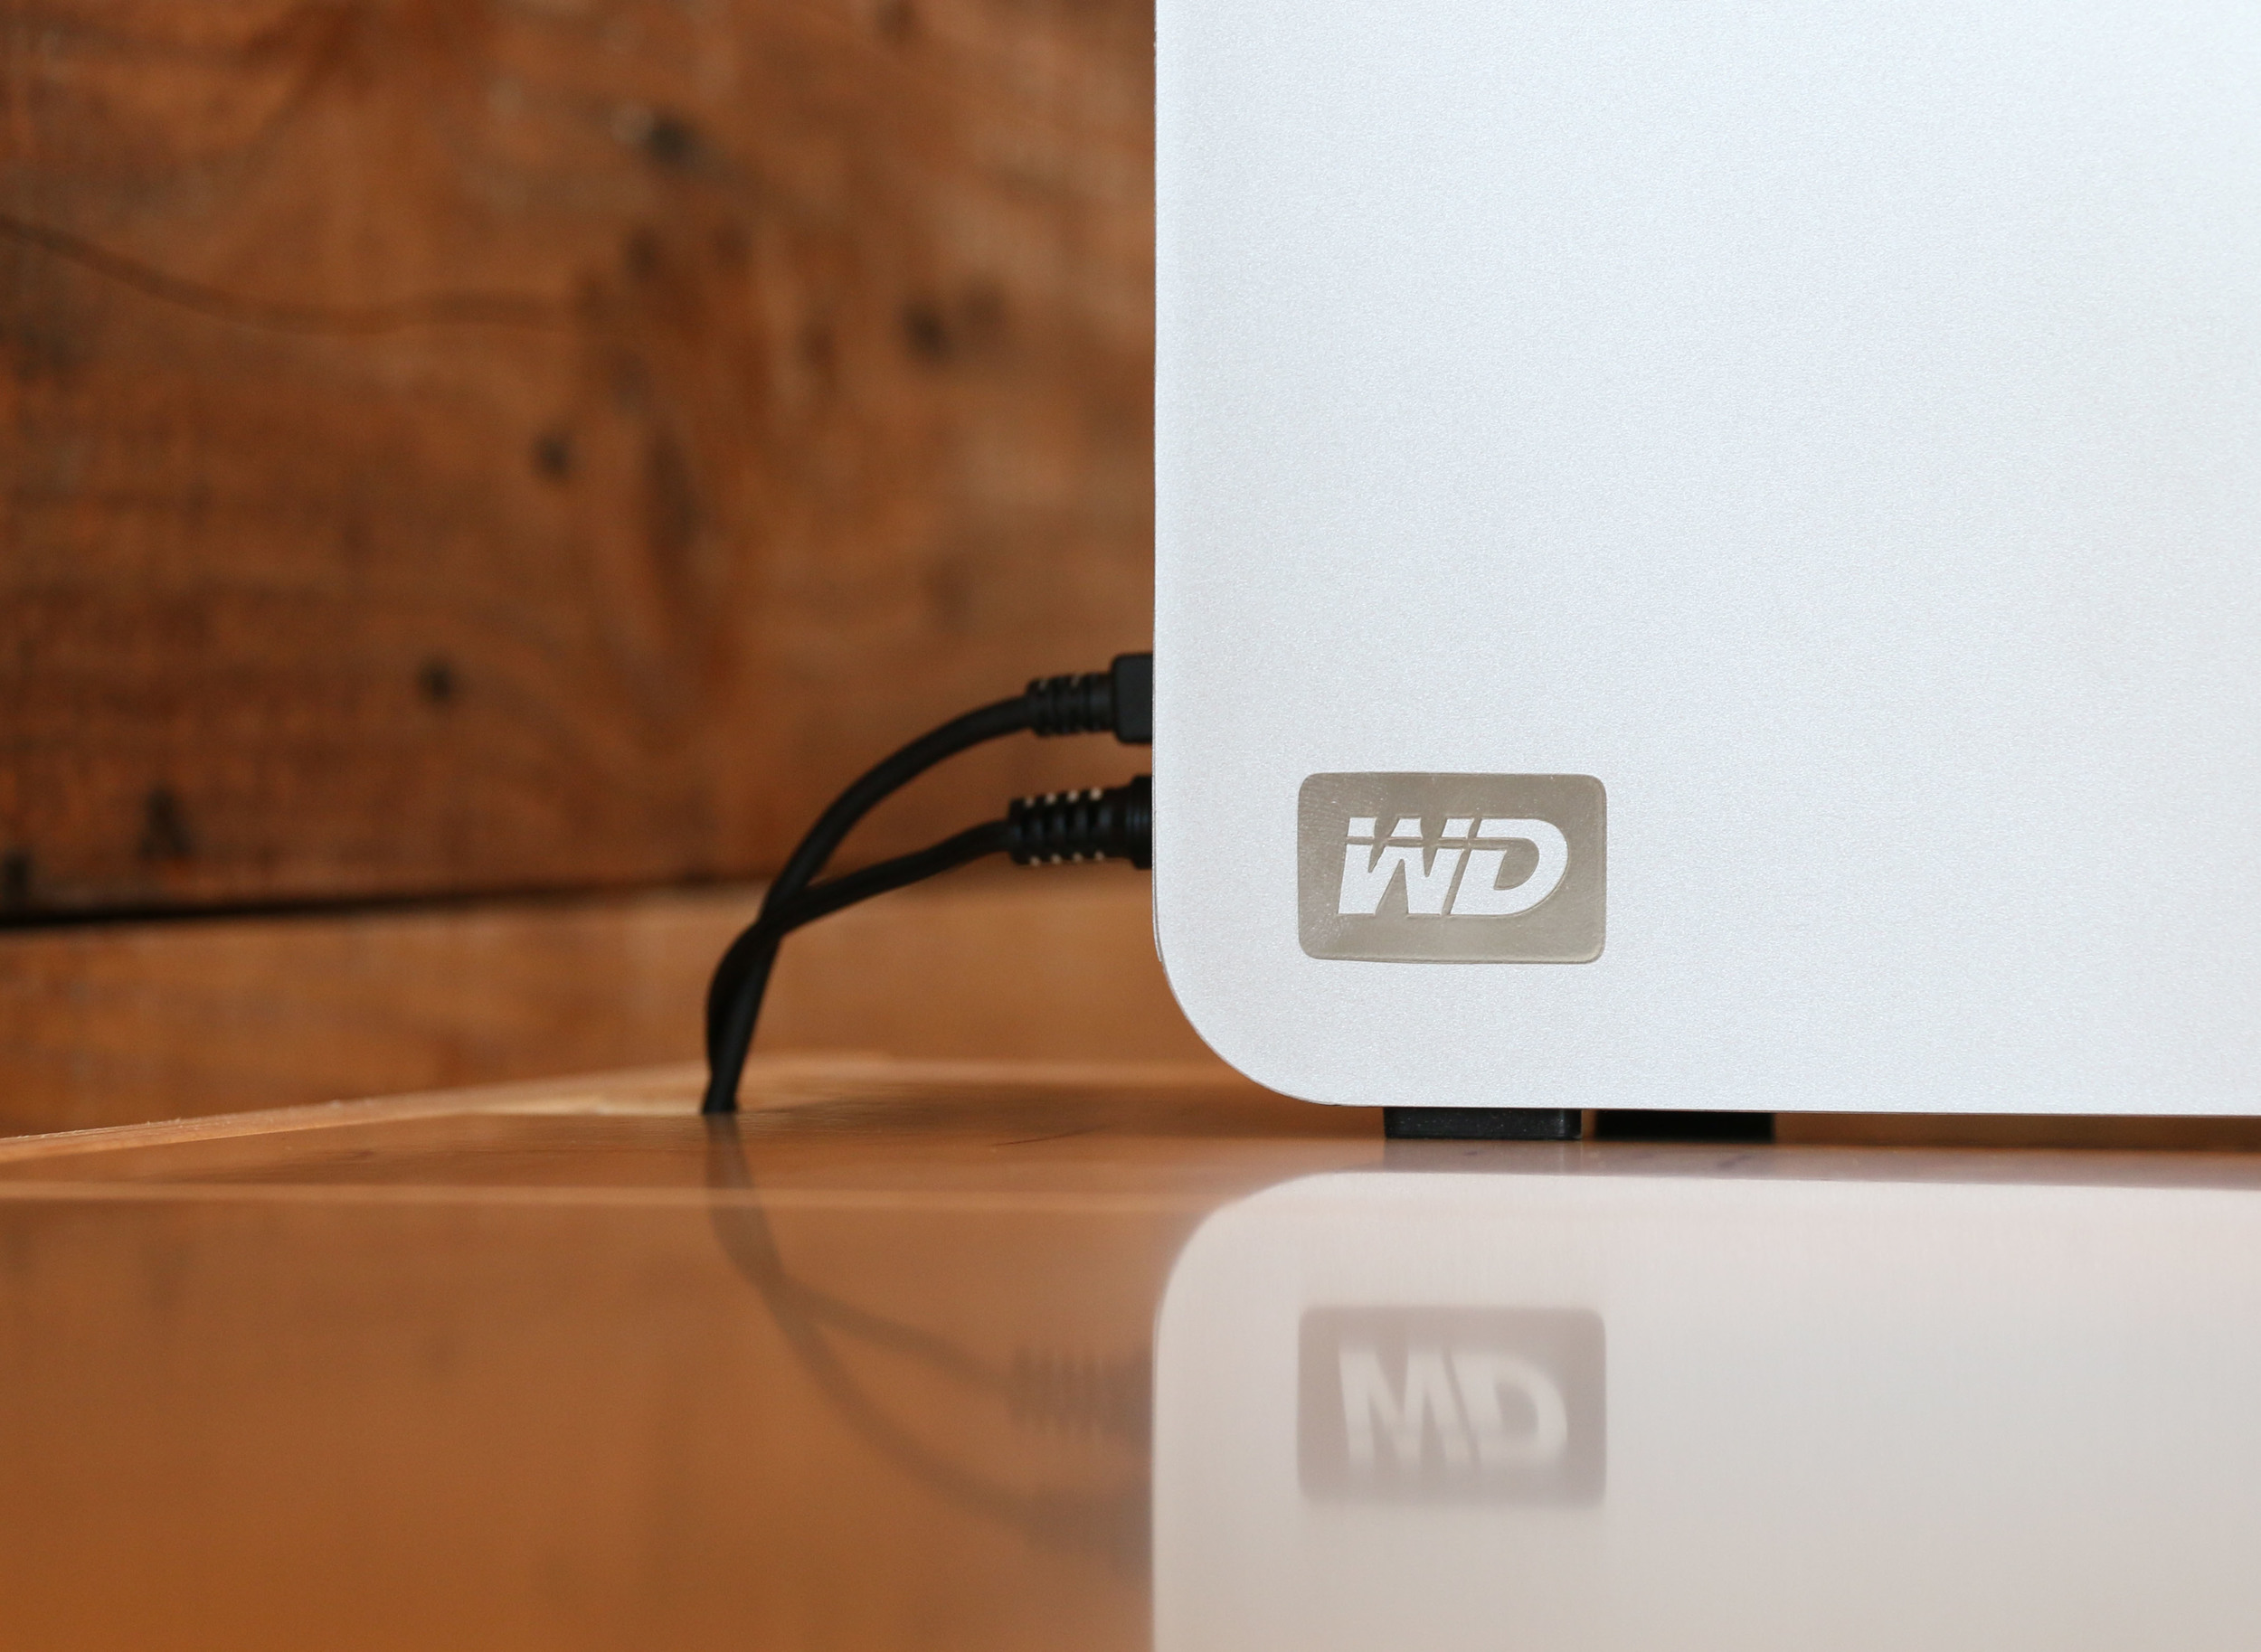  Storage-Top Desk for Mac with external hard drive 